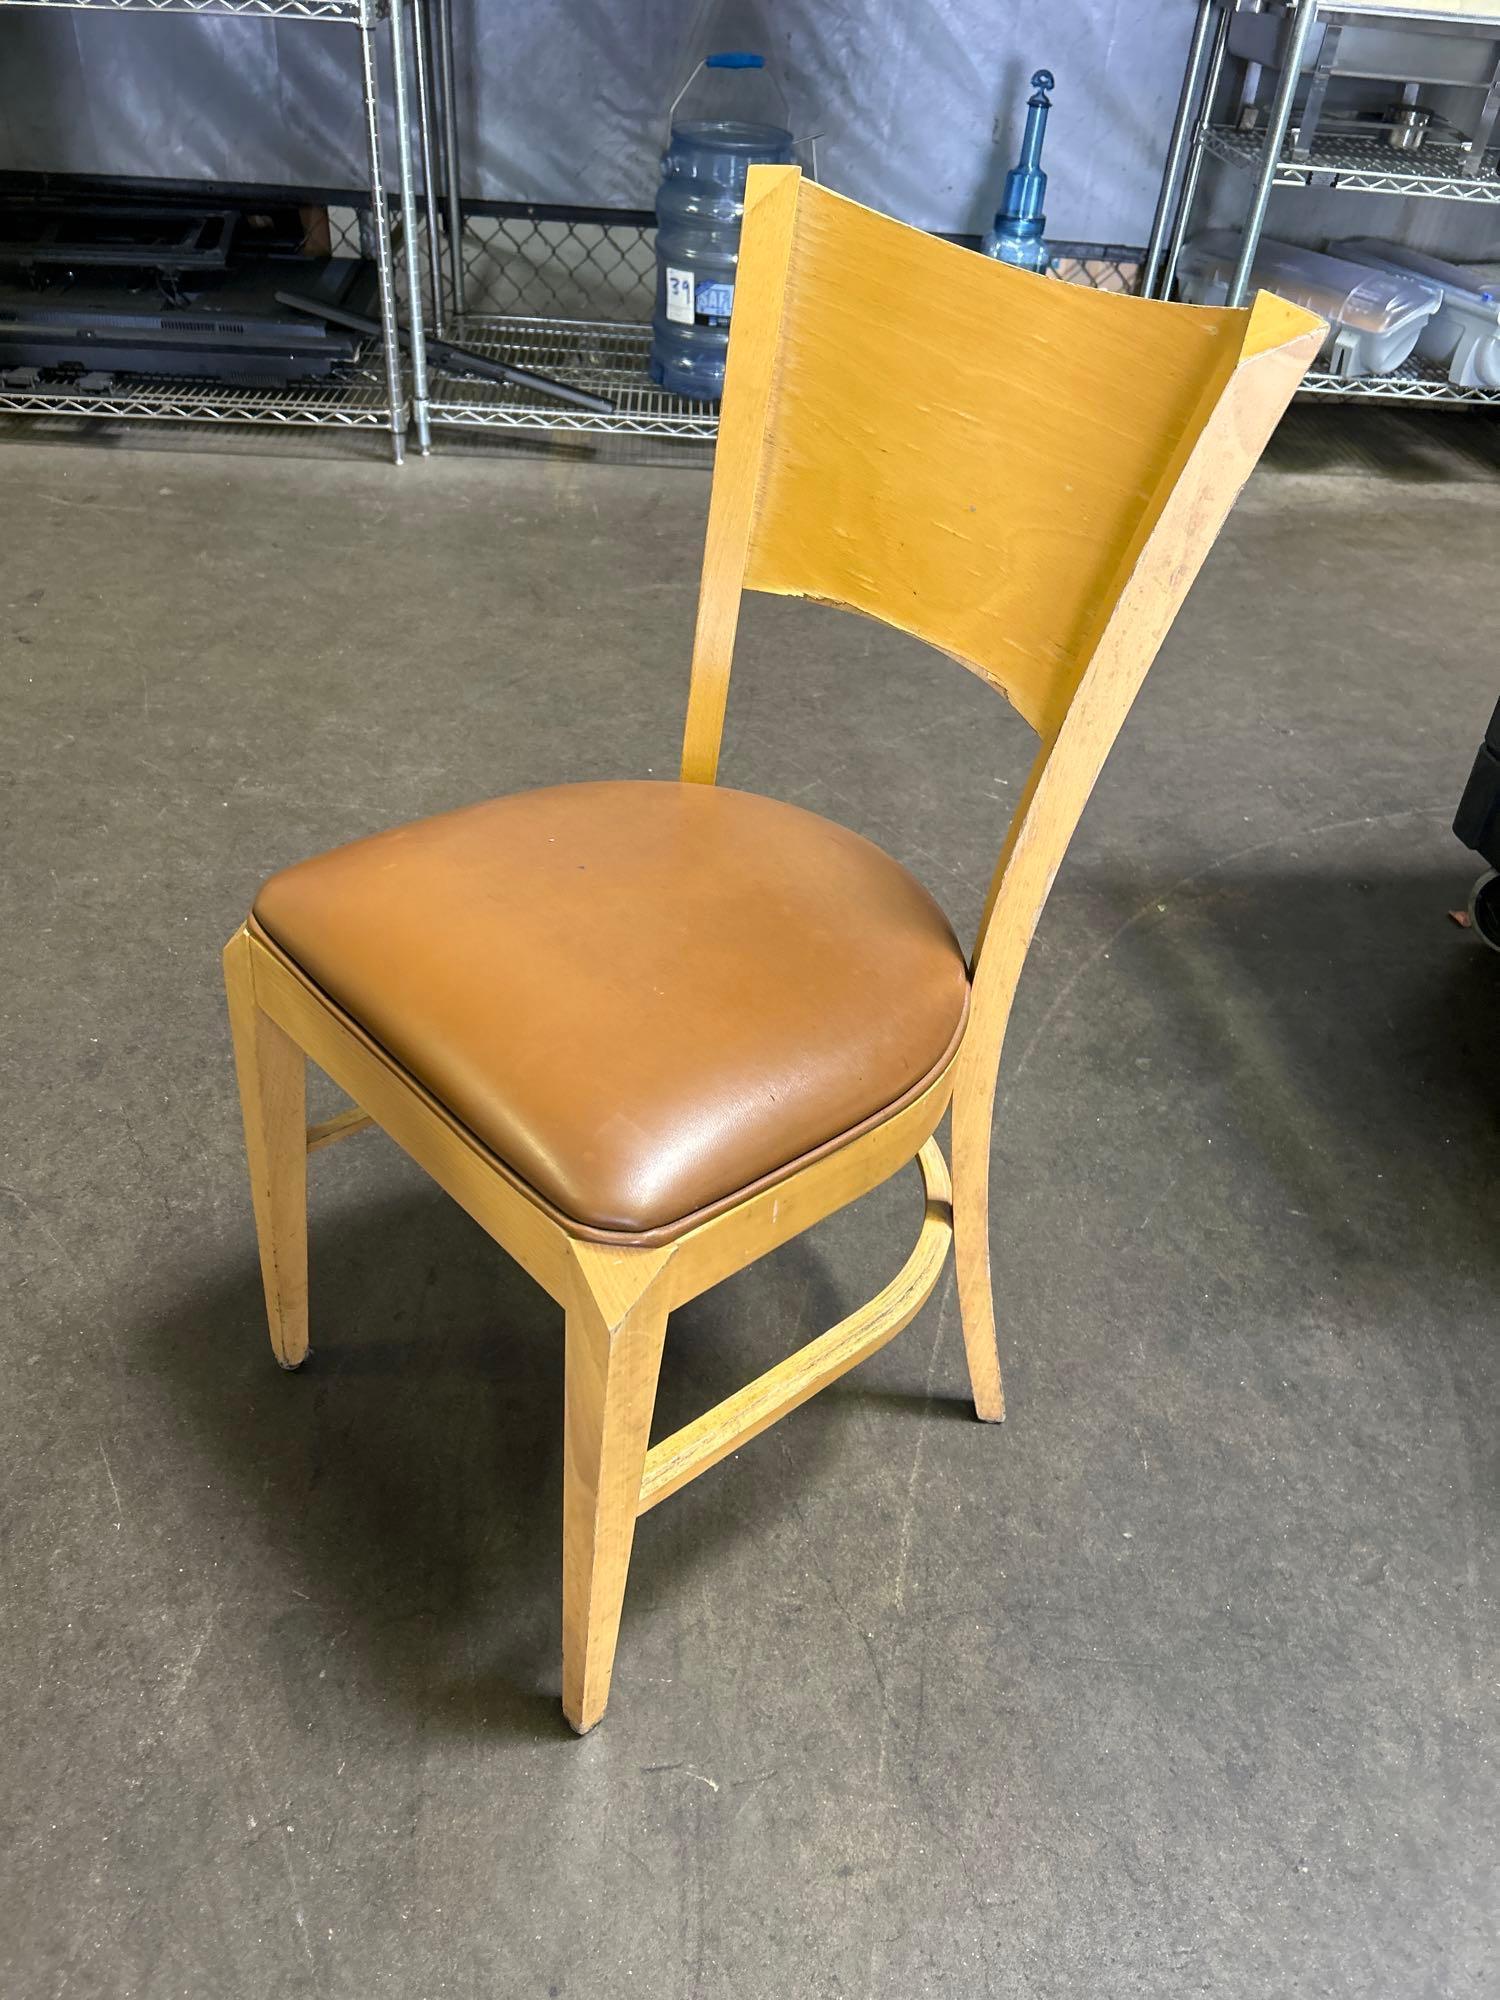 Wood Chairs with Brown Upholstery